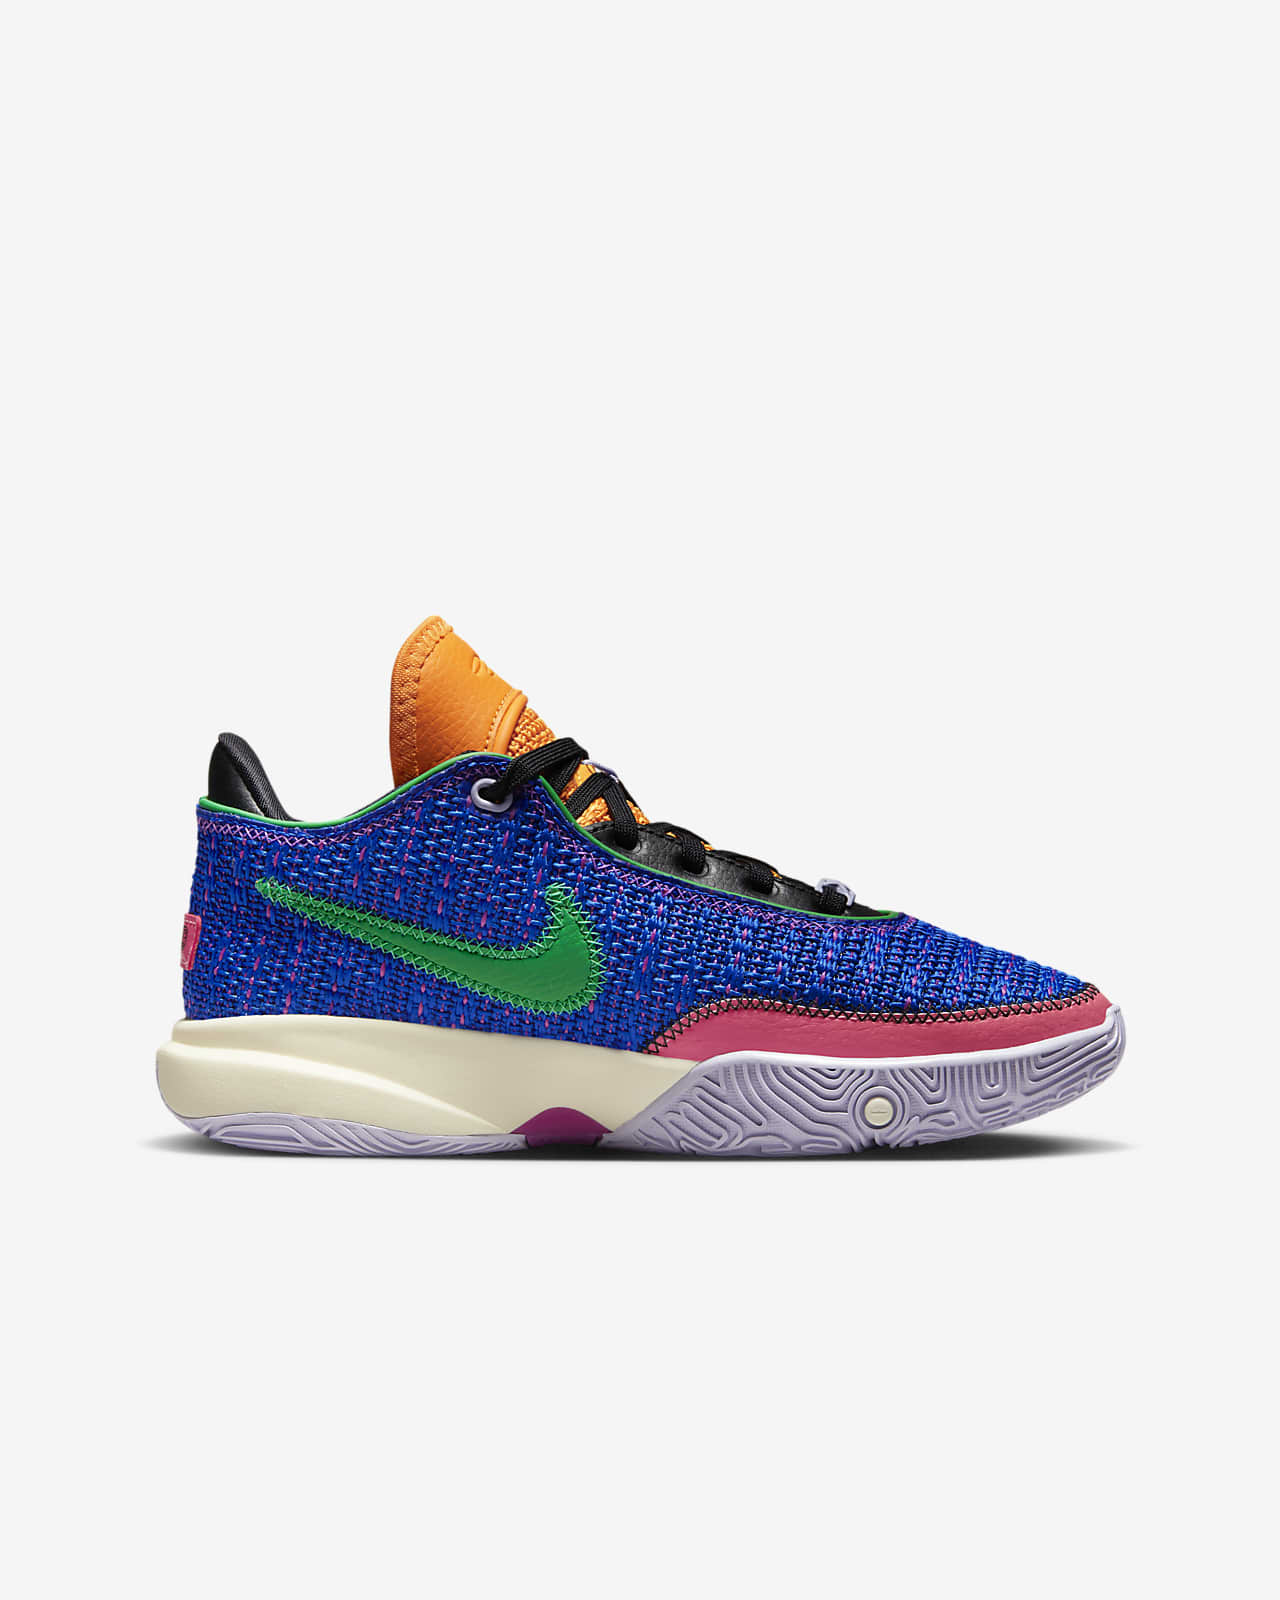 Nike”Max Lebron XL Low (GS) 5y bright yellow pink and blue tennis shoe